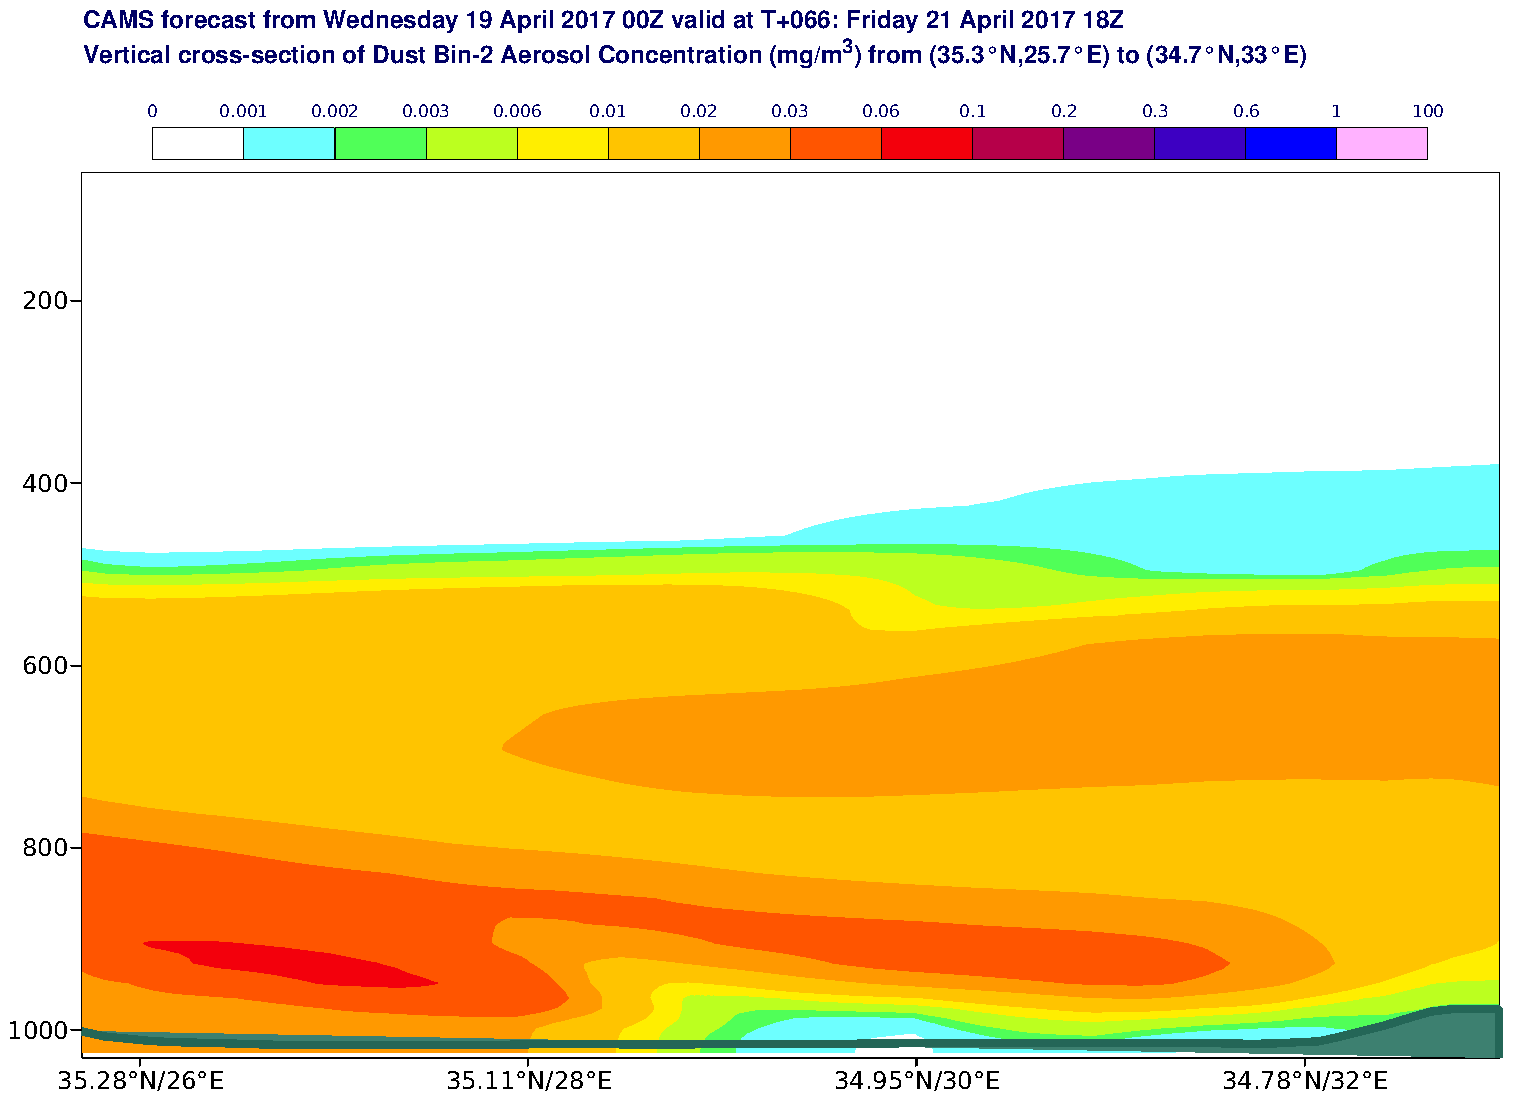 Vertical cross-section of Dust Bin-2 Aerosol Concentration (mg/m3) valid at T66 - 2017-04-21 18:00